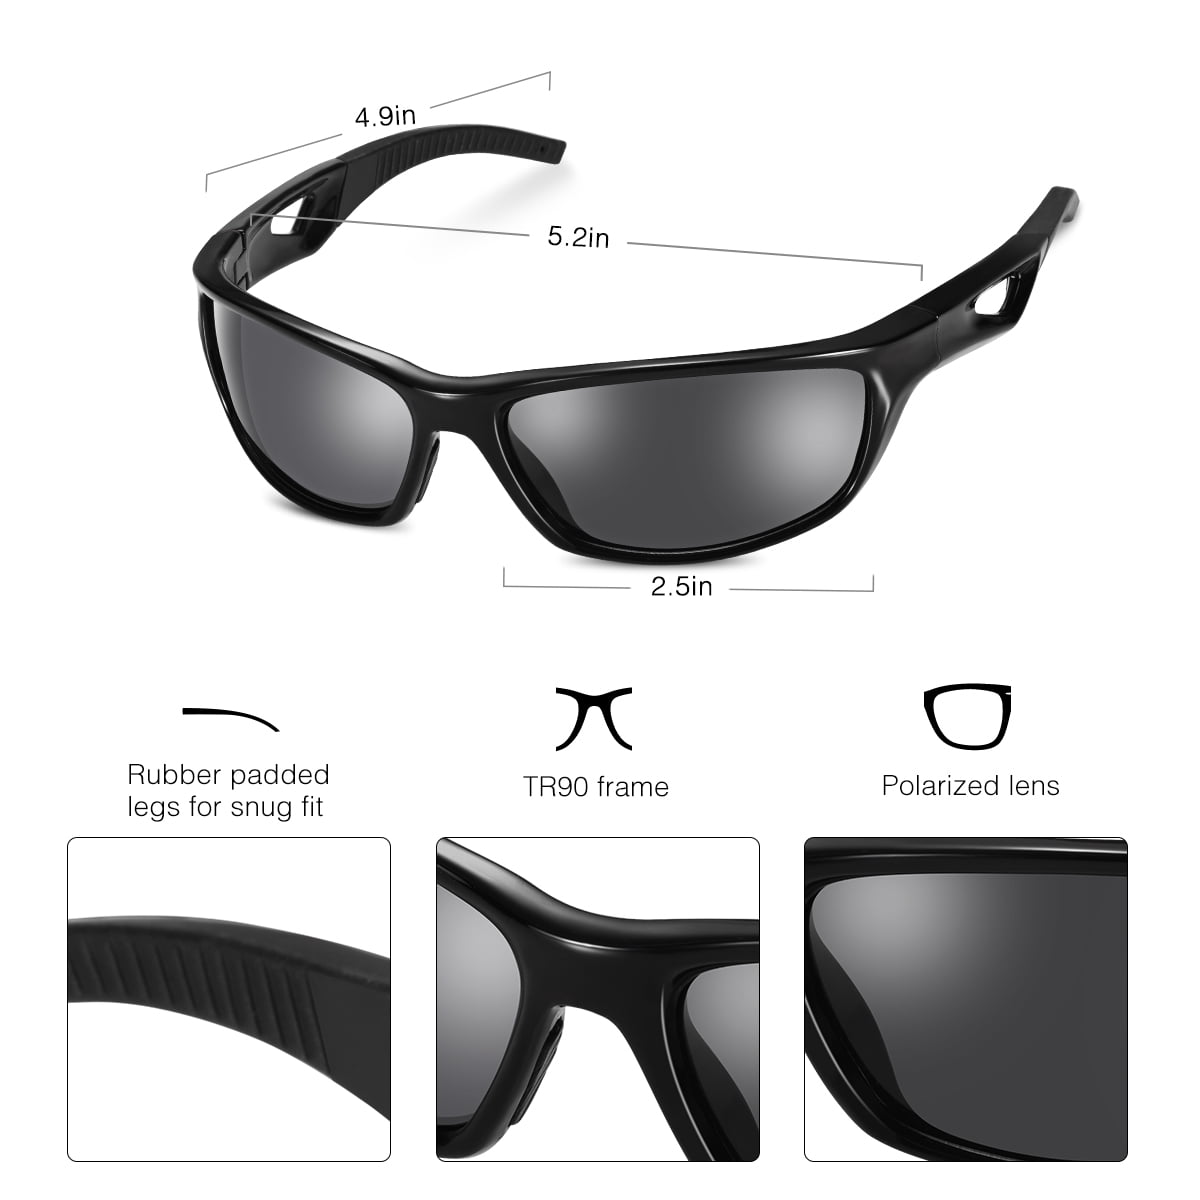 Fashionable Sports Sunglasses for All Outdoor Activities. UVB & Anti Glare Protection Lenses Polarized Sunglasses for Men and Women FLEX RIG Ultra Tough & Lightweight TR90 Frame and 100% UVA 